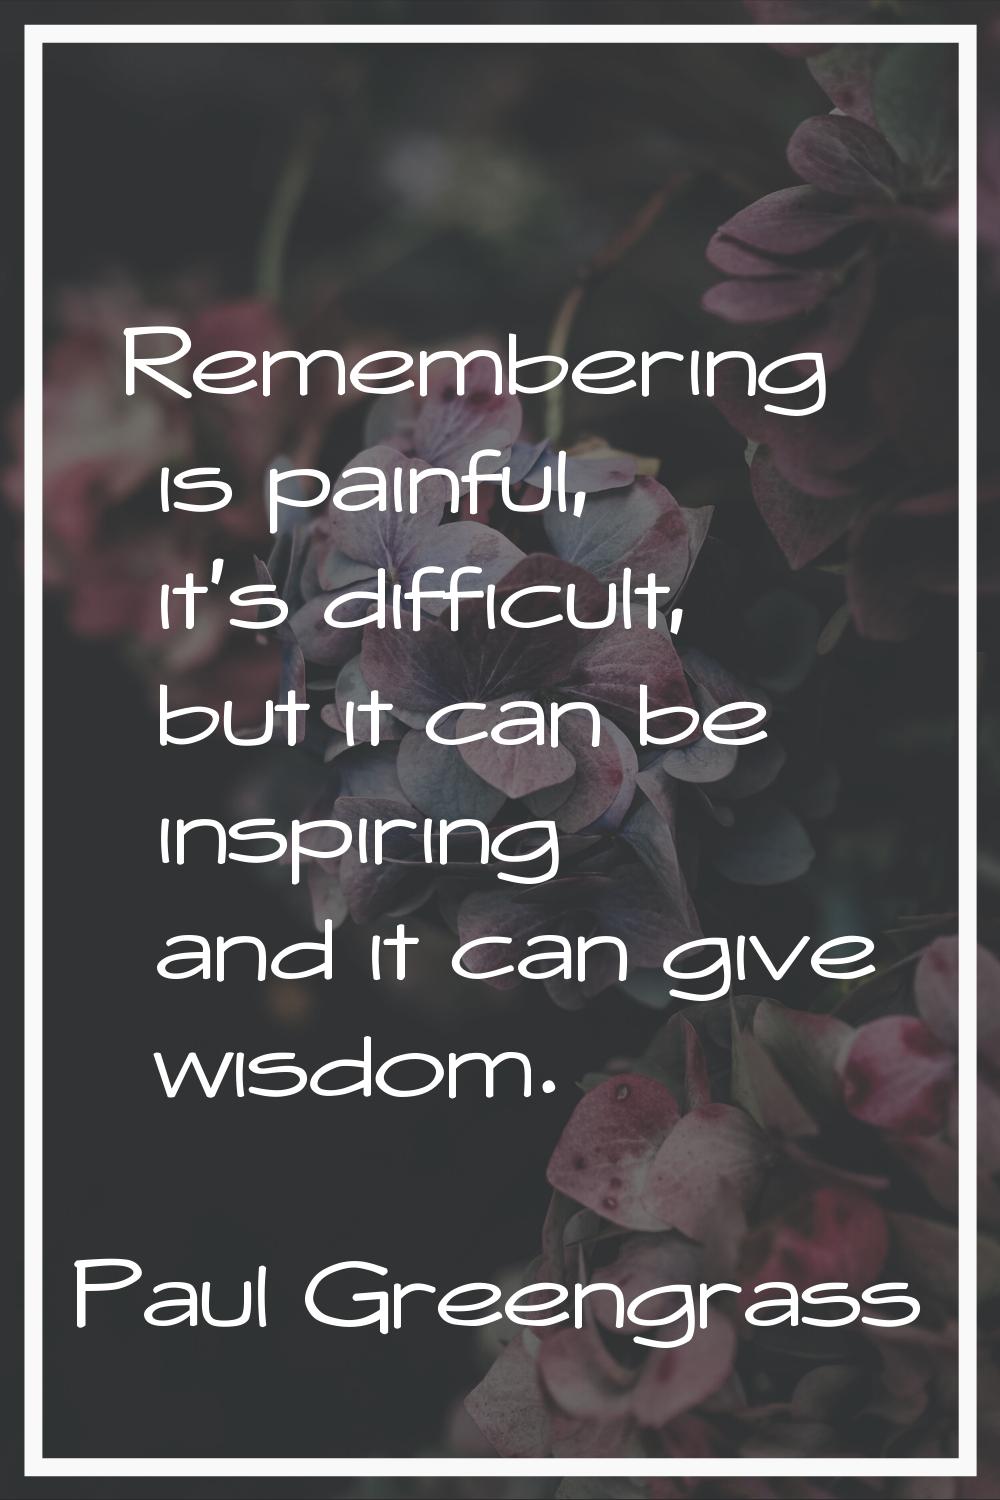 Remembering is painful, it's difficult, but it can be inspiring and it can give wisdom.